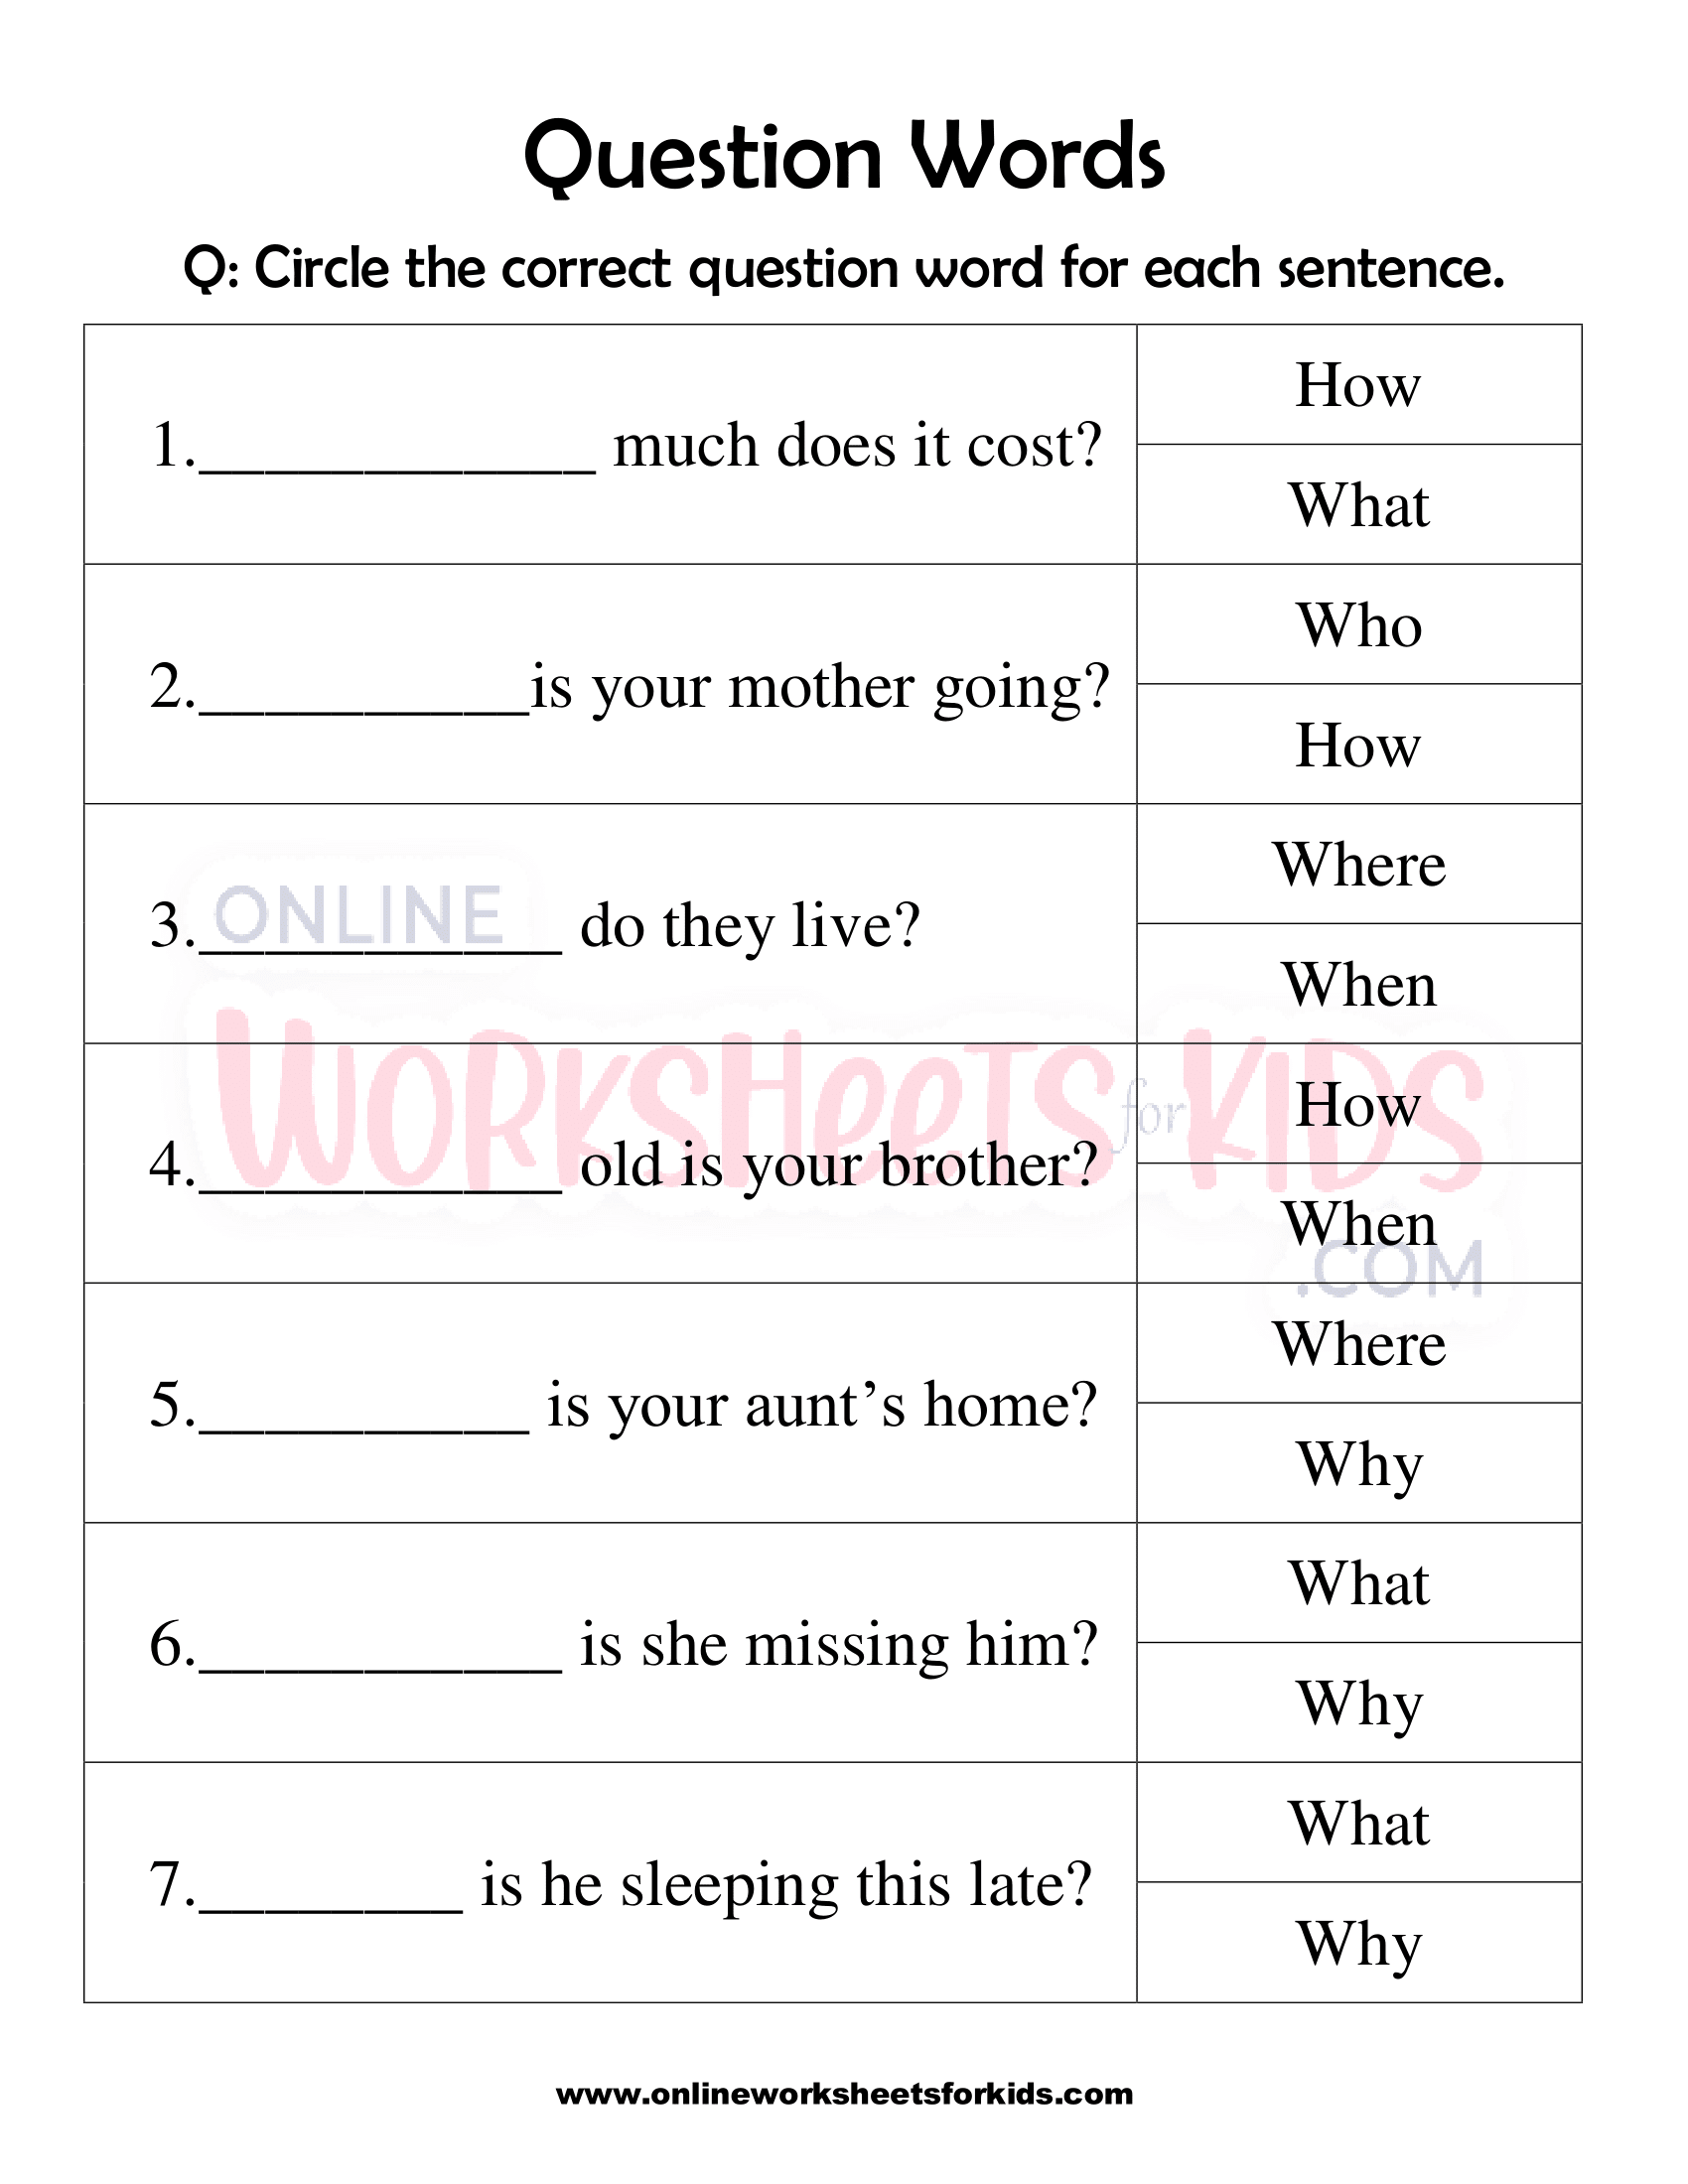 question-word-worksheet-for-grade-1-3